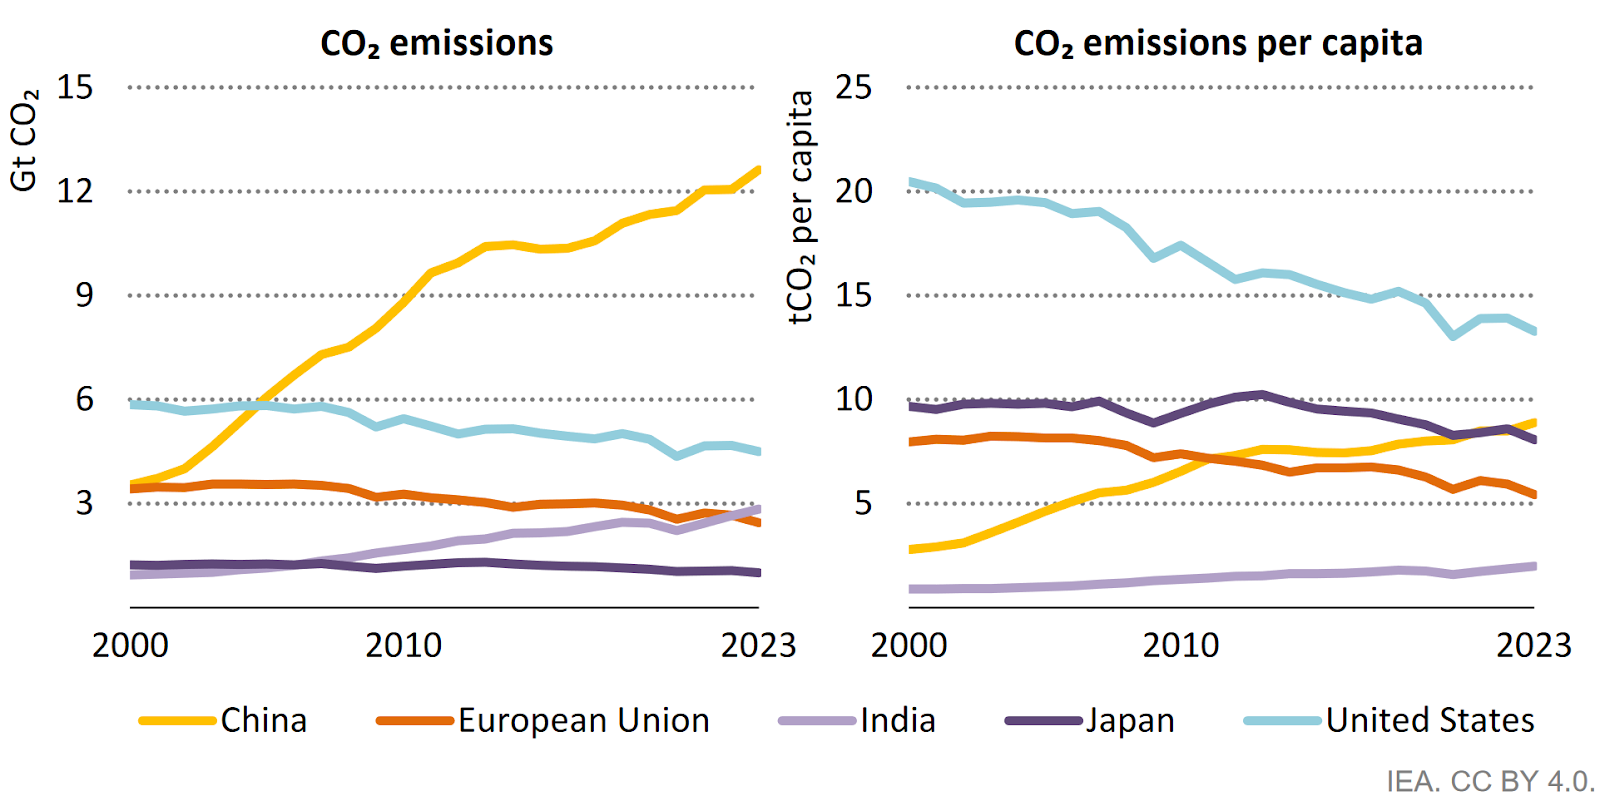 CO2 Total and CO2 Per Capita by Region, Source: IEA